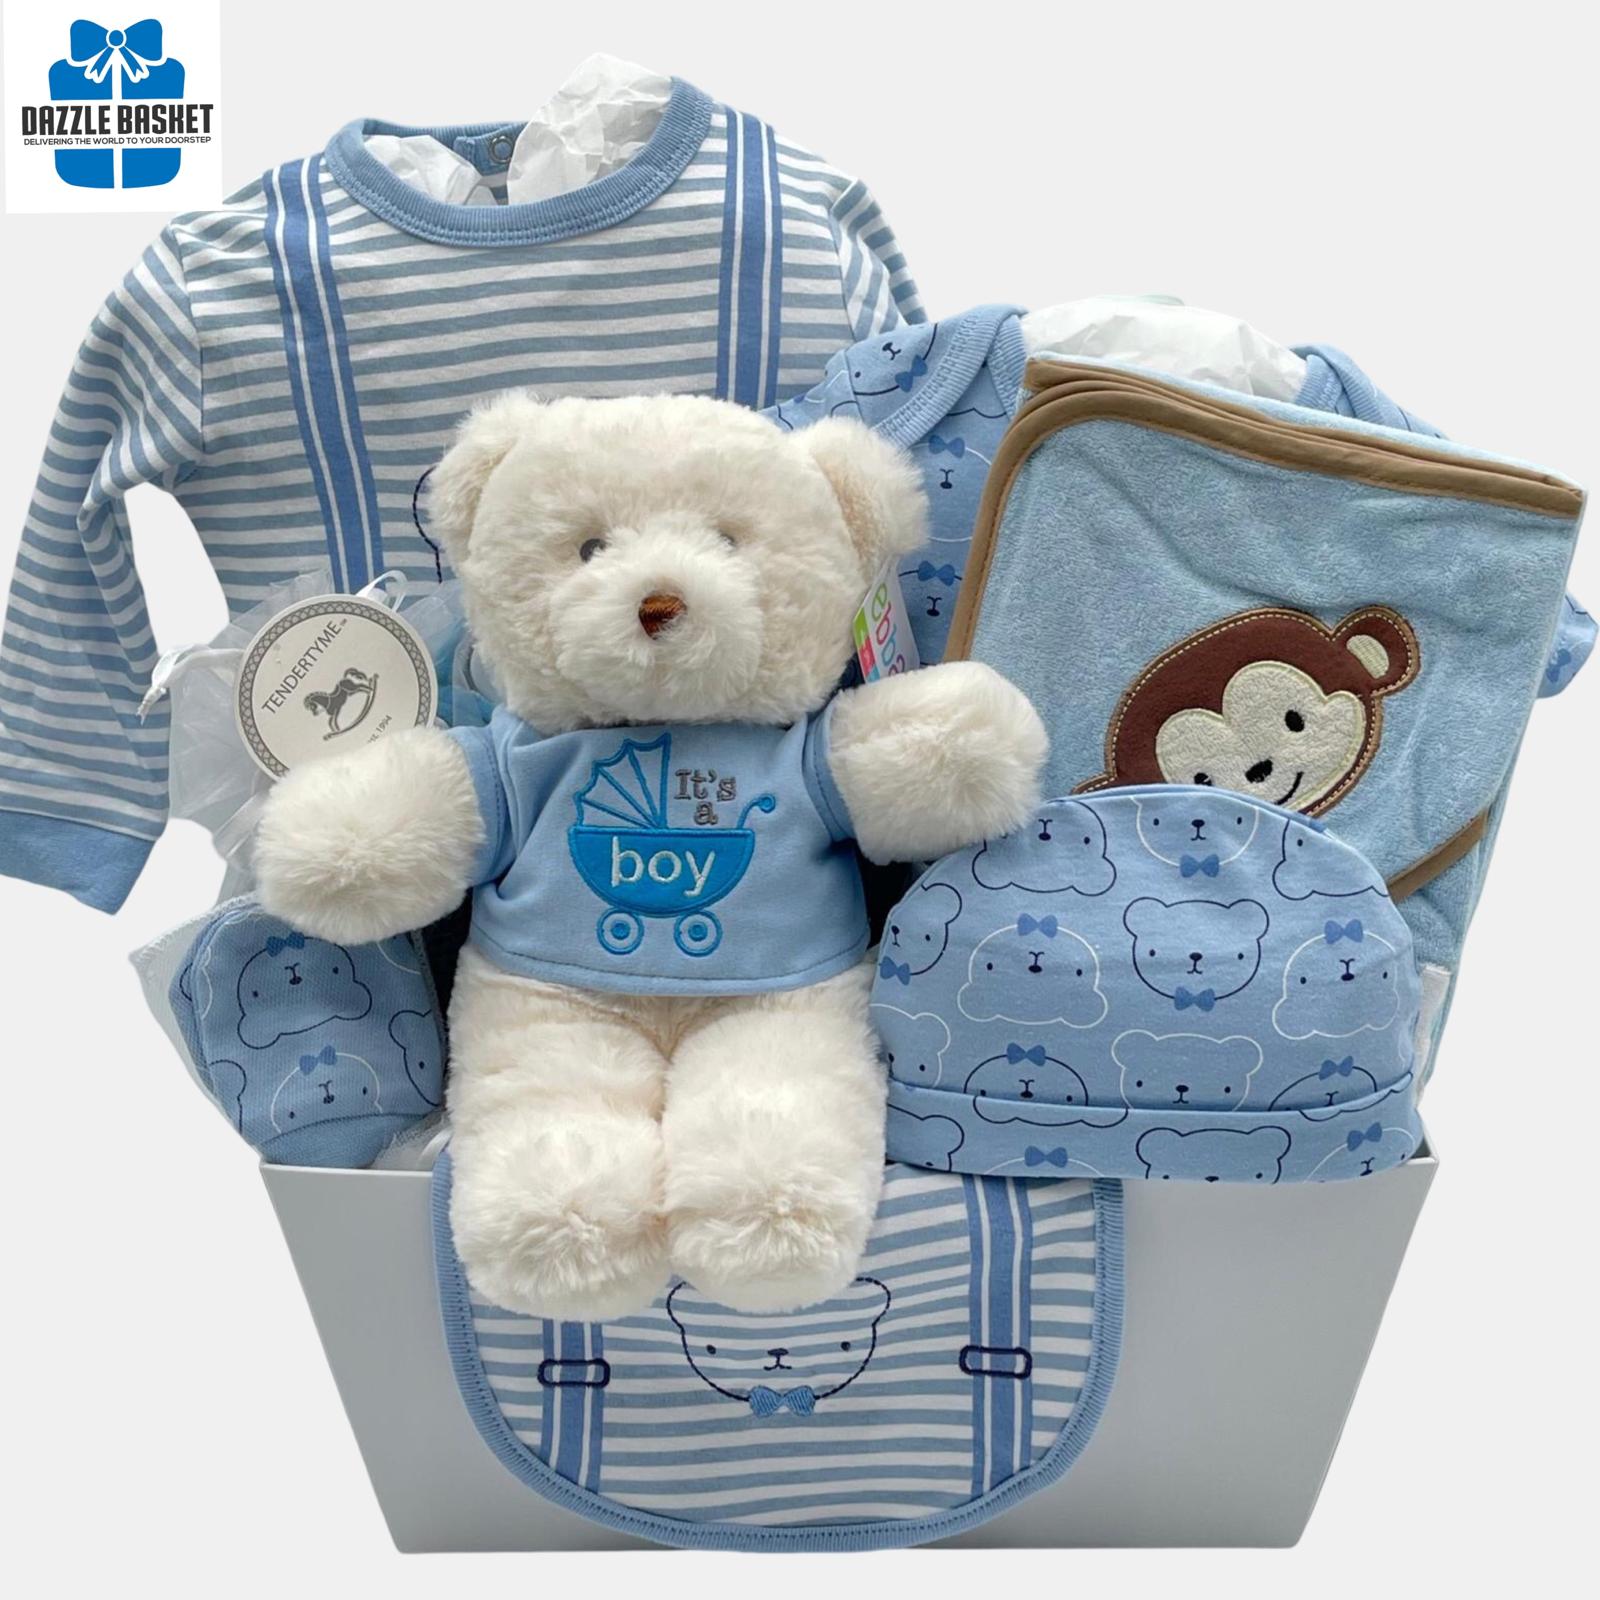 Calgary baby boy gift basket that includes quality product that the little angel will simply love.